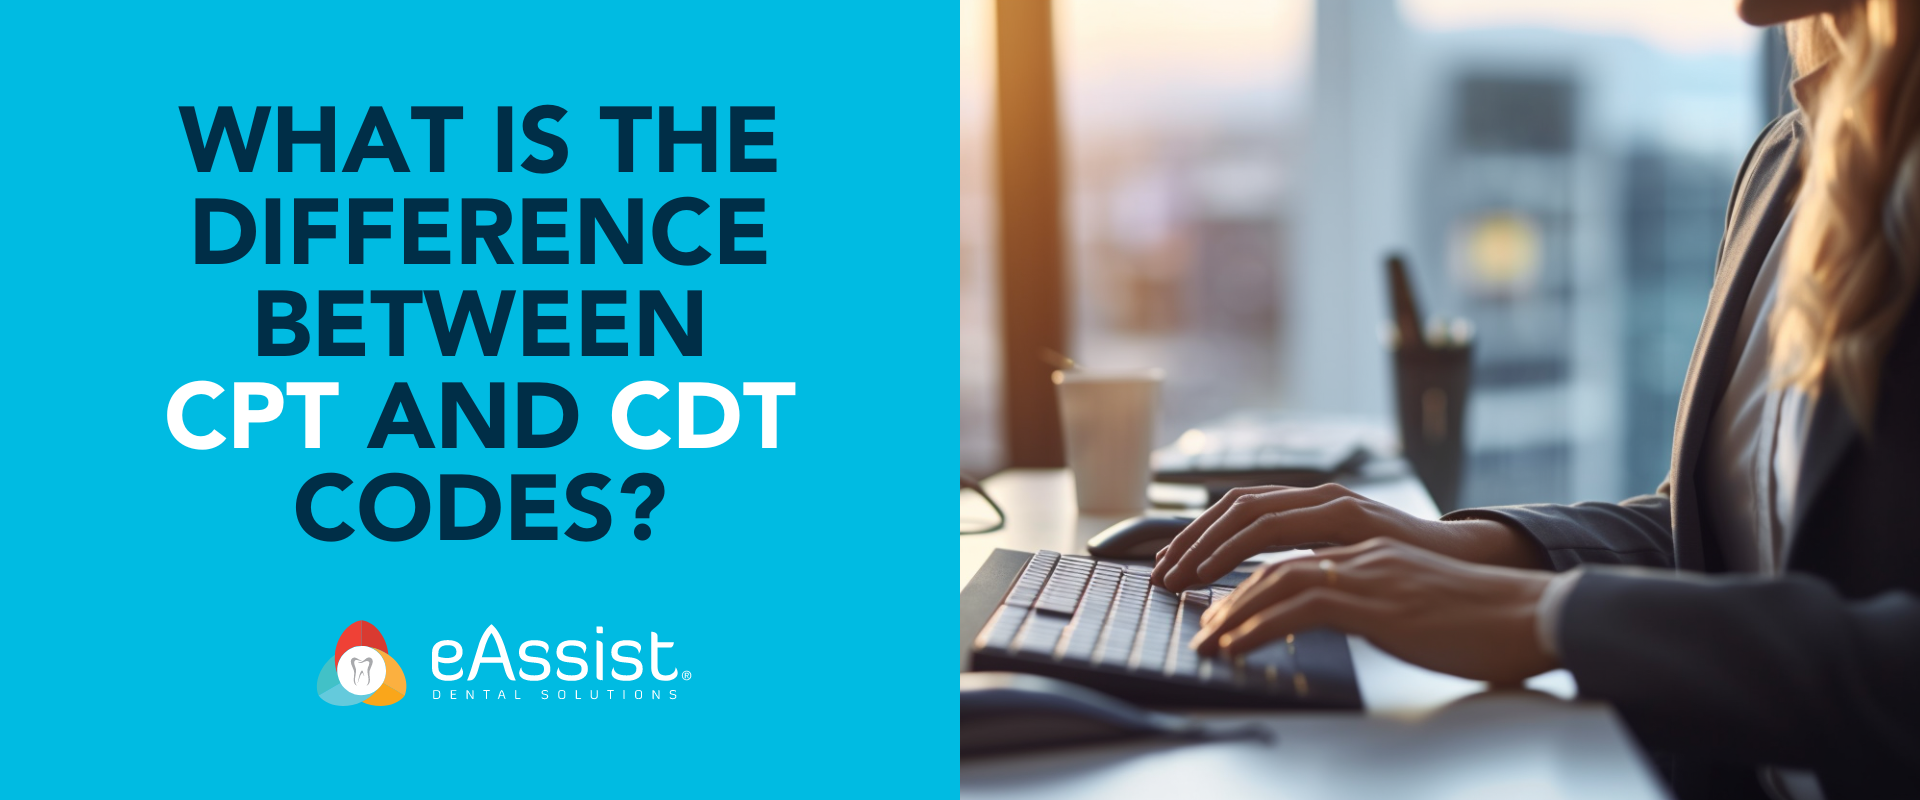 What is the Difference Between CPT and CDT Codes?